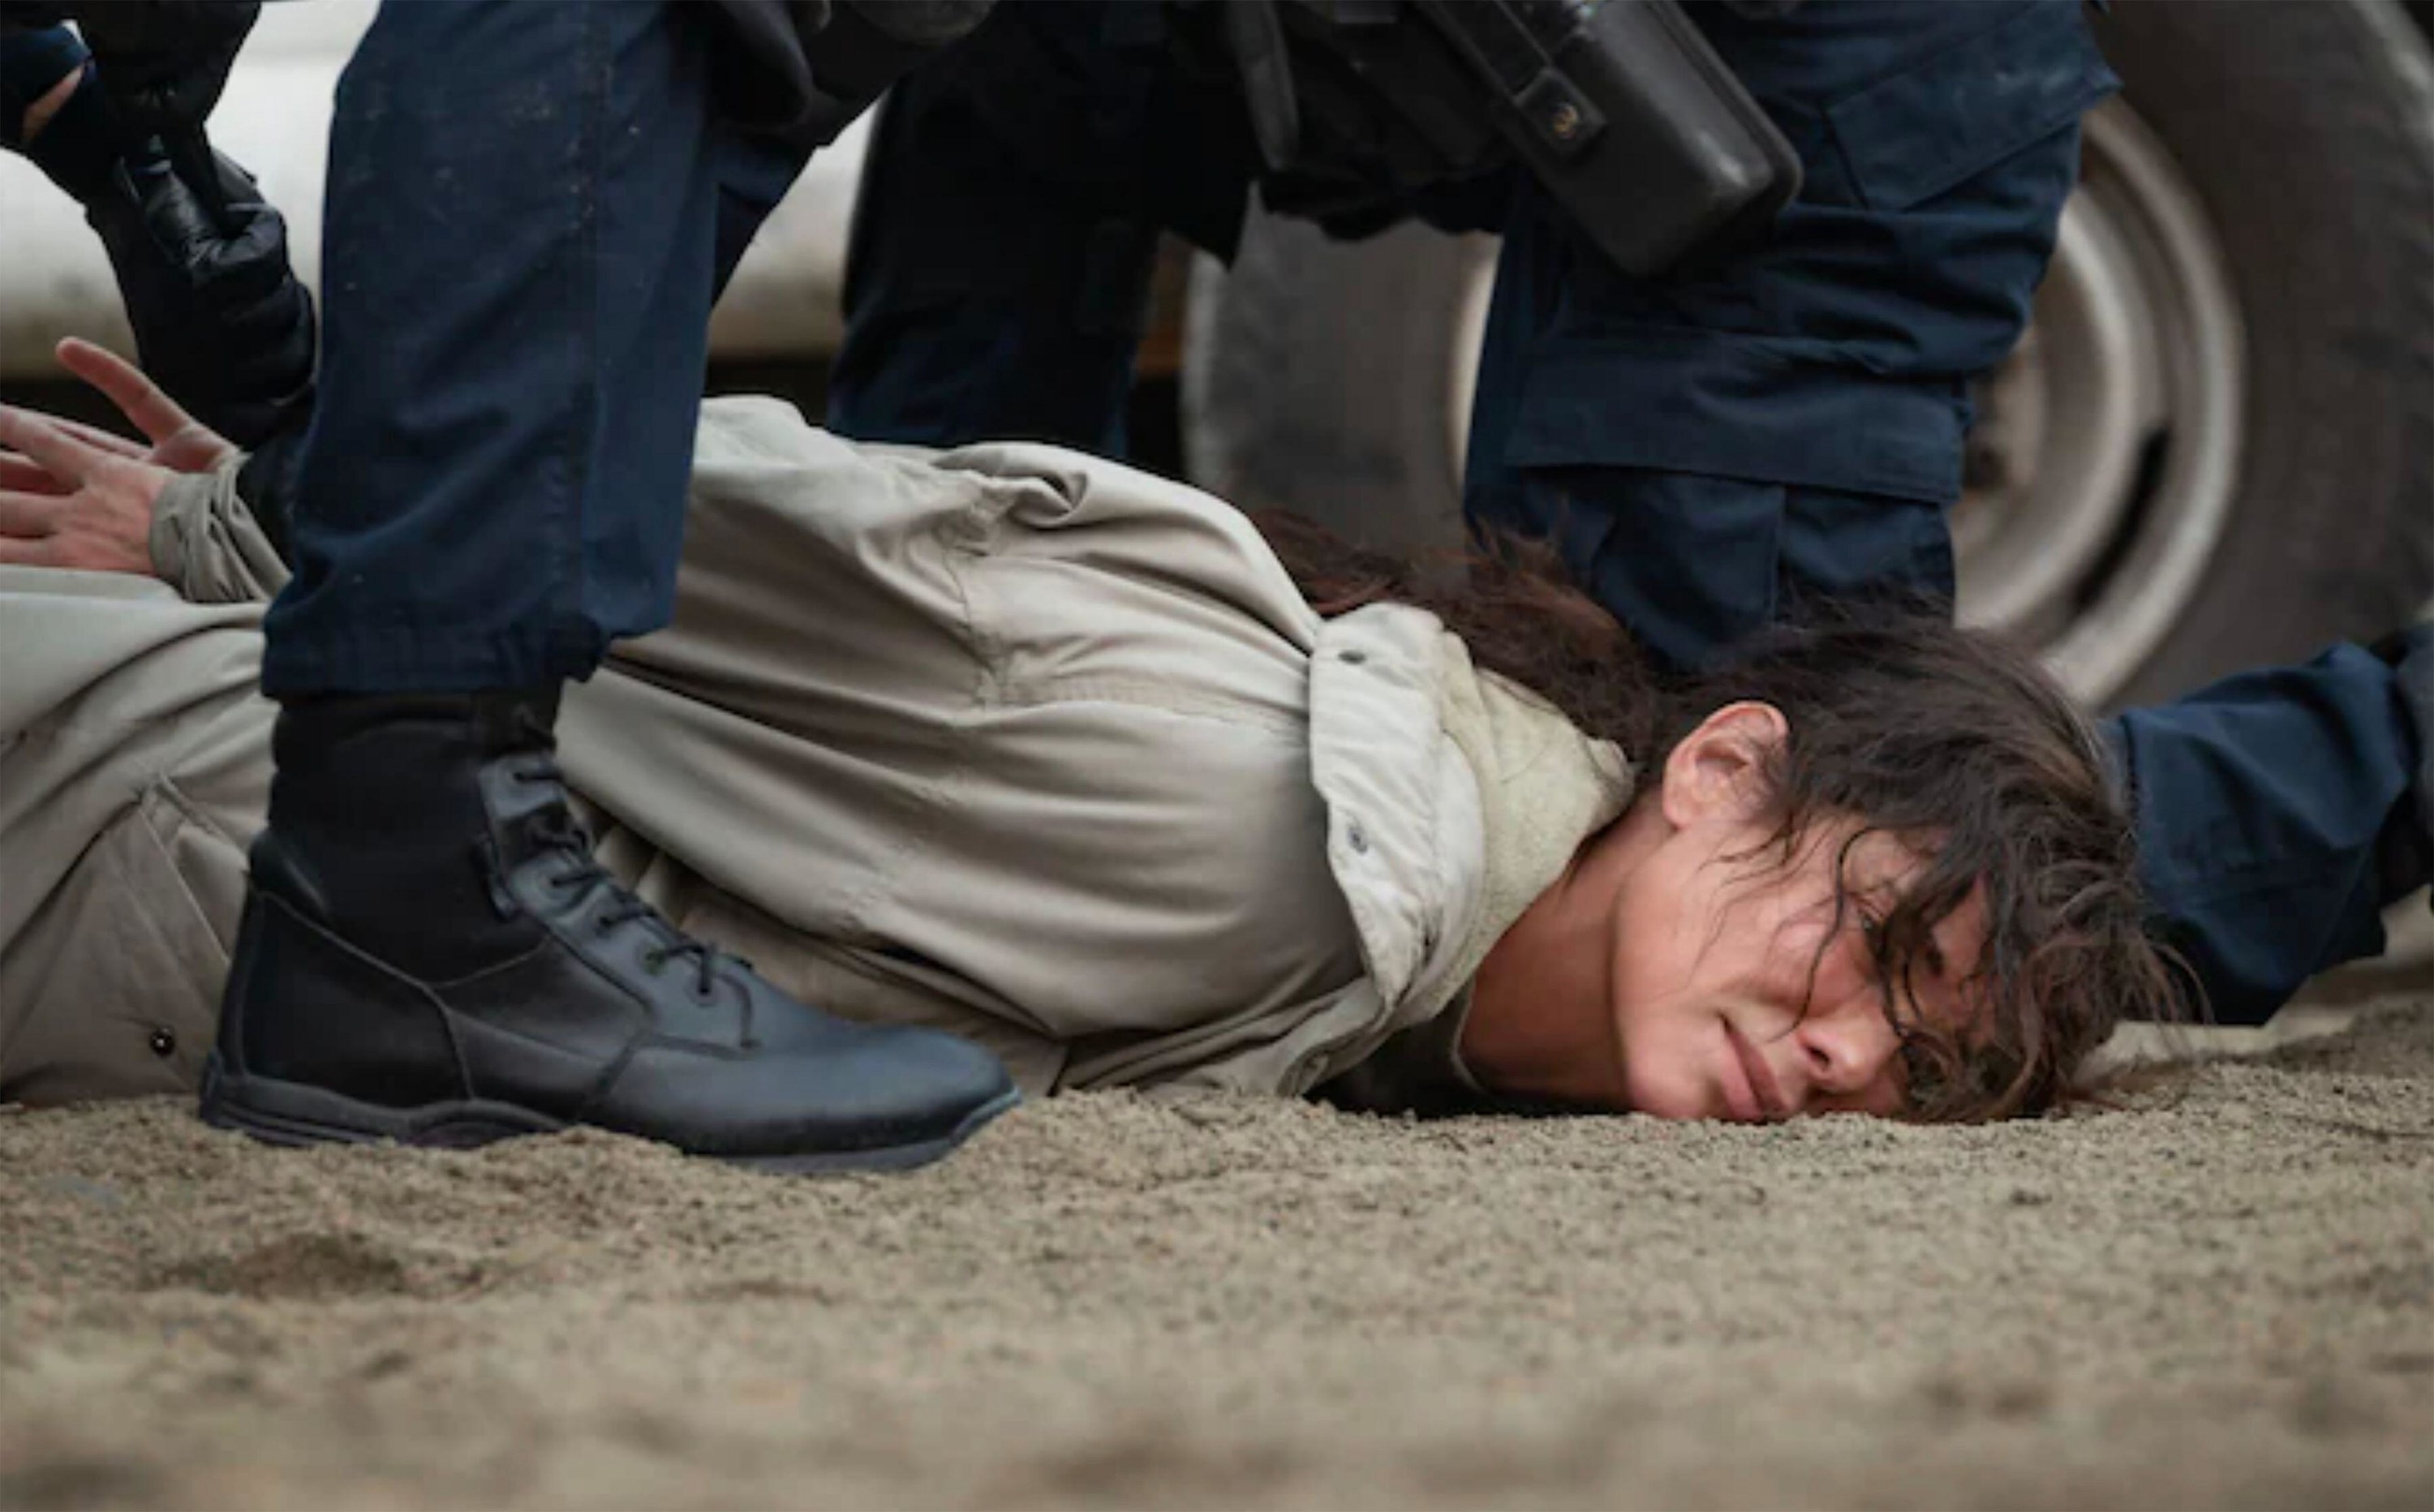 A woman is on her belly with her hands behind her back as police apprehend her.